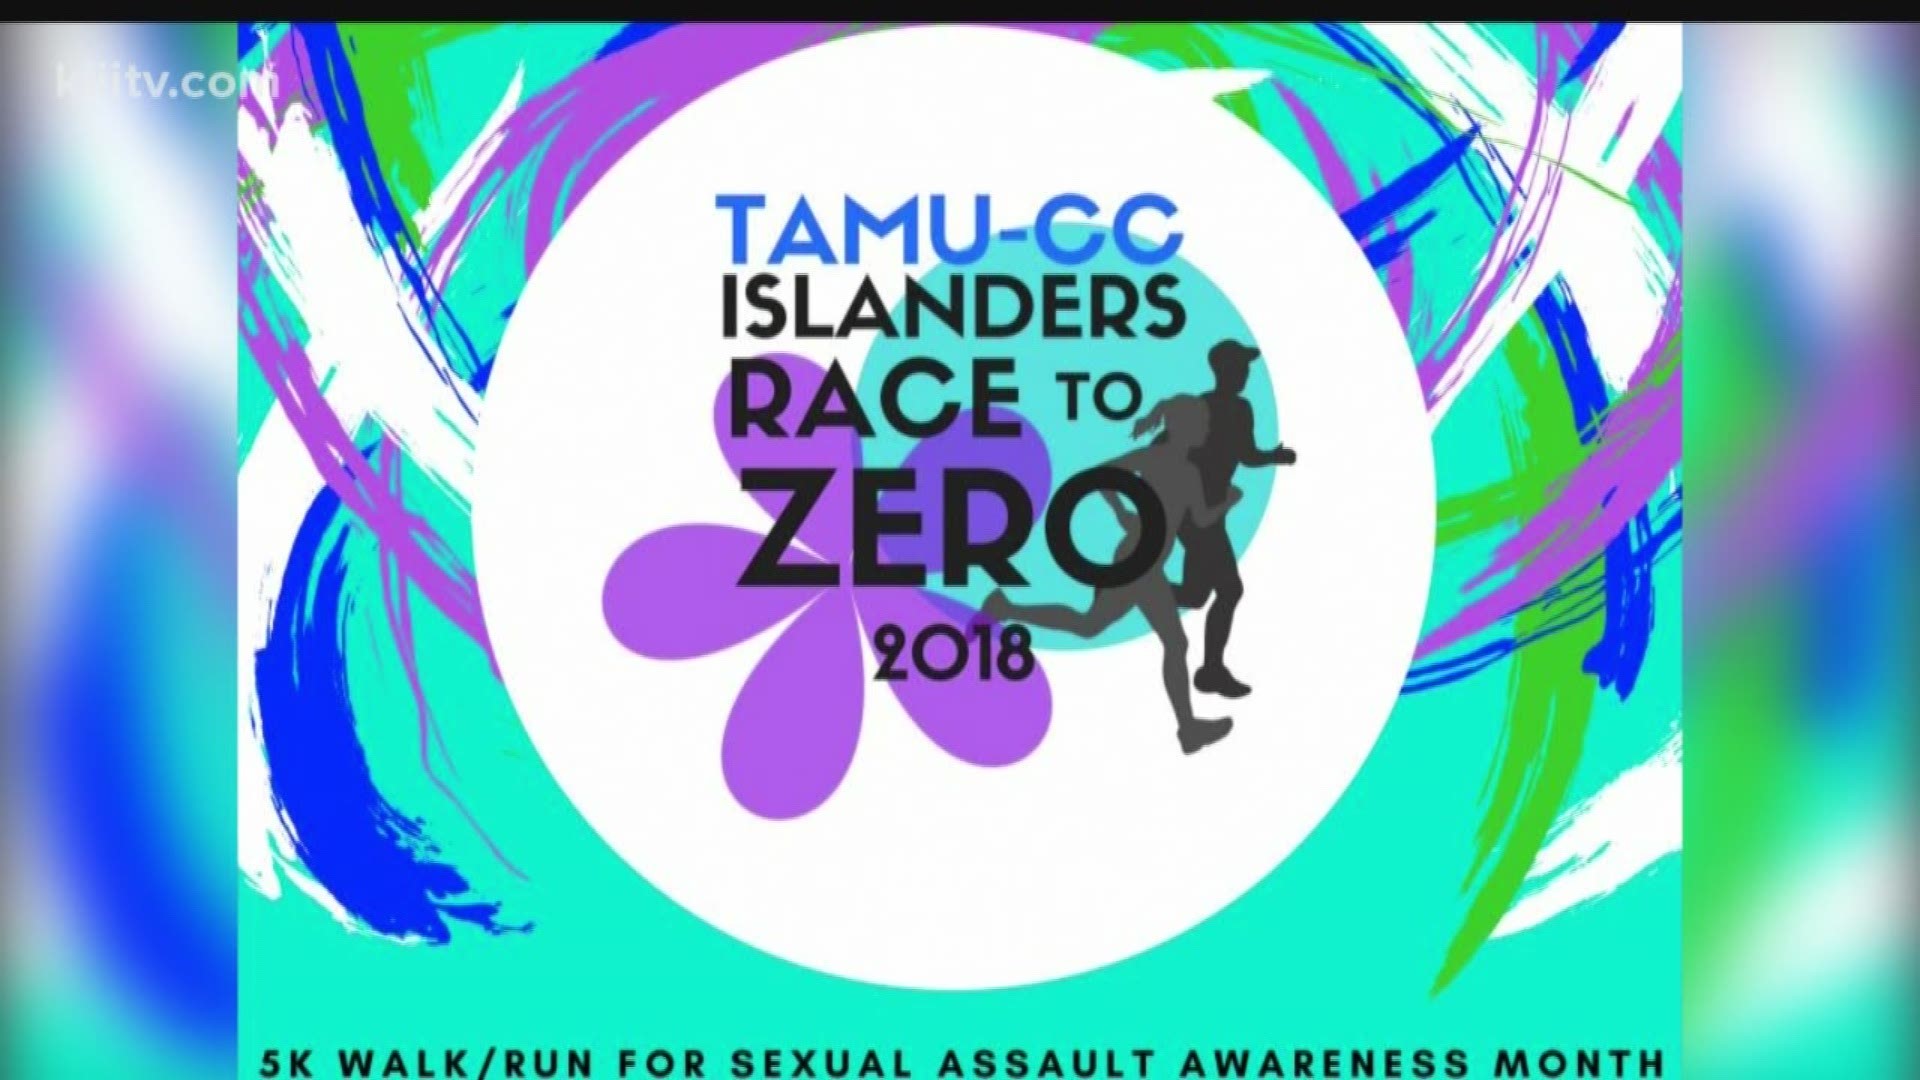 The Island University is hosting the Inaugural Race to Zero 5k on Friday, April 20, 2018.